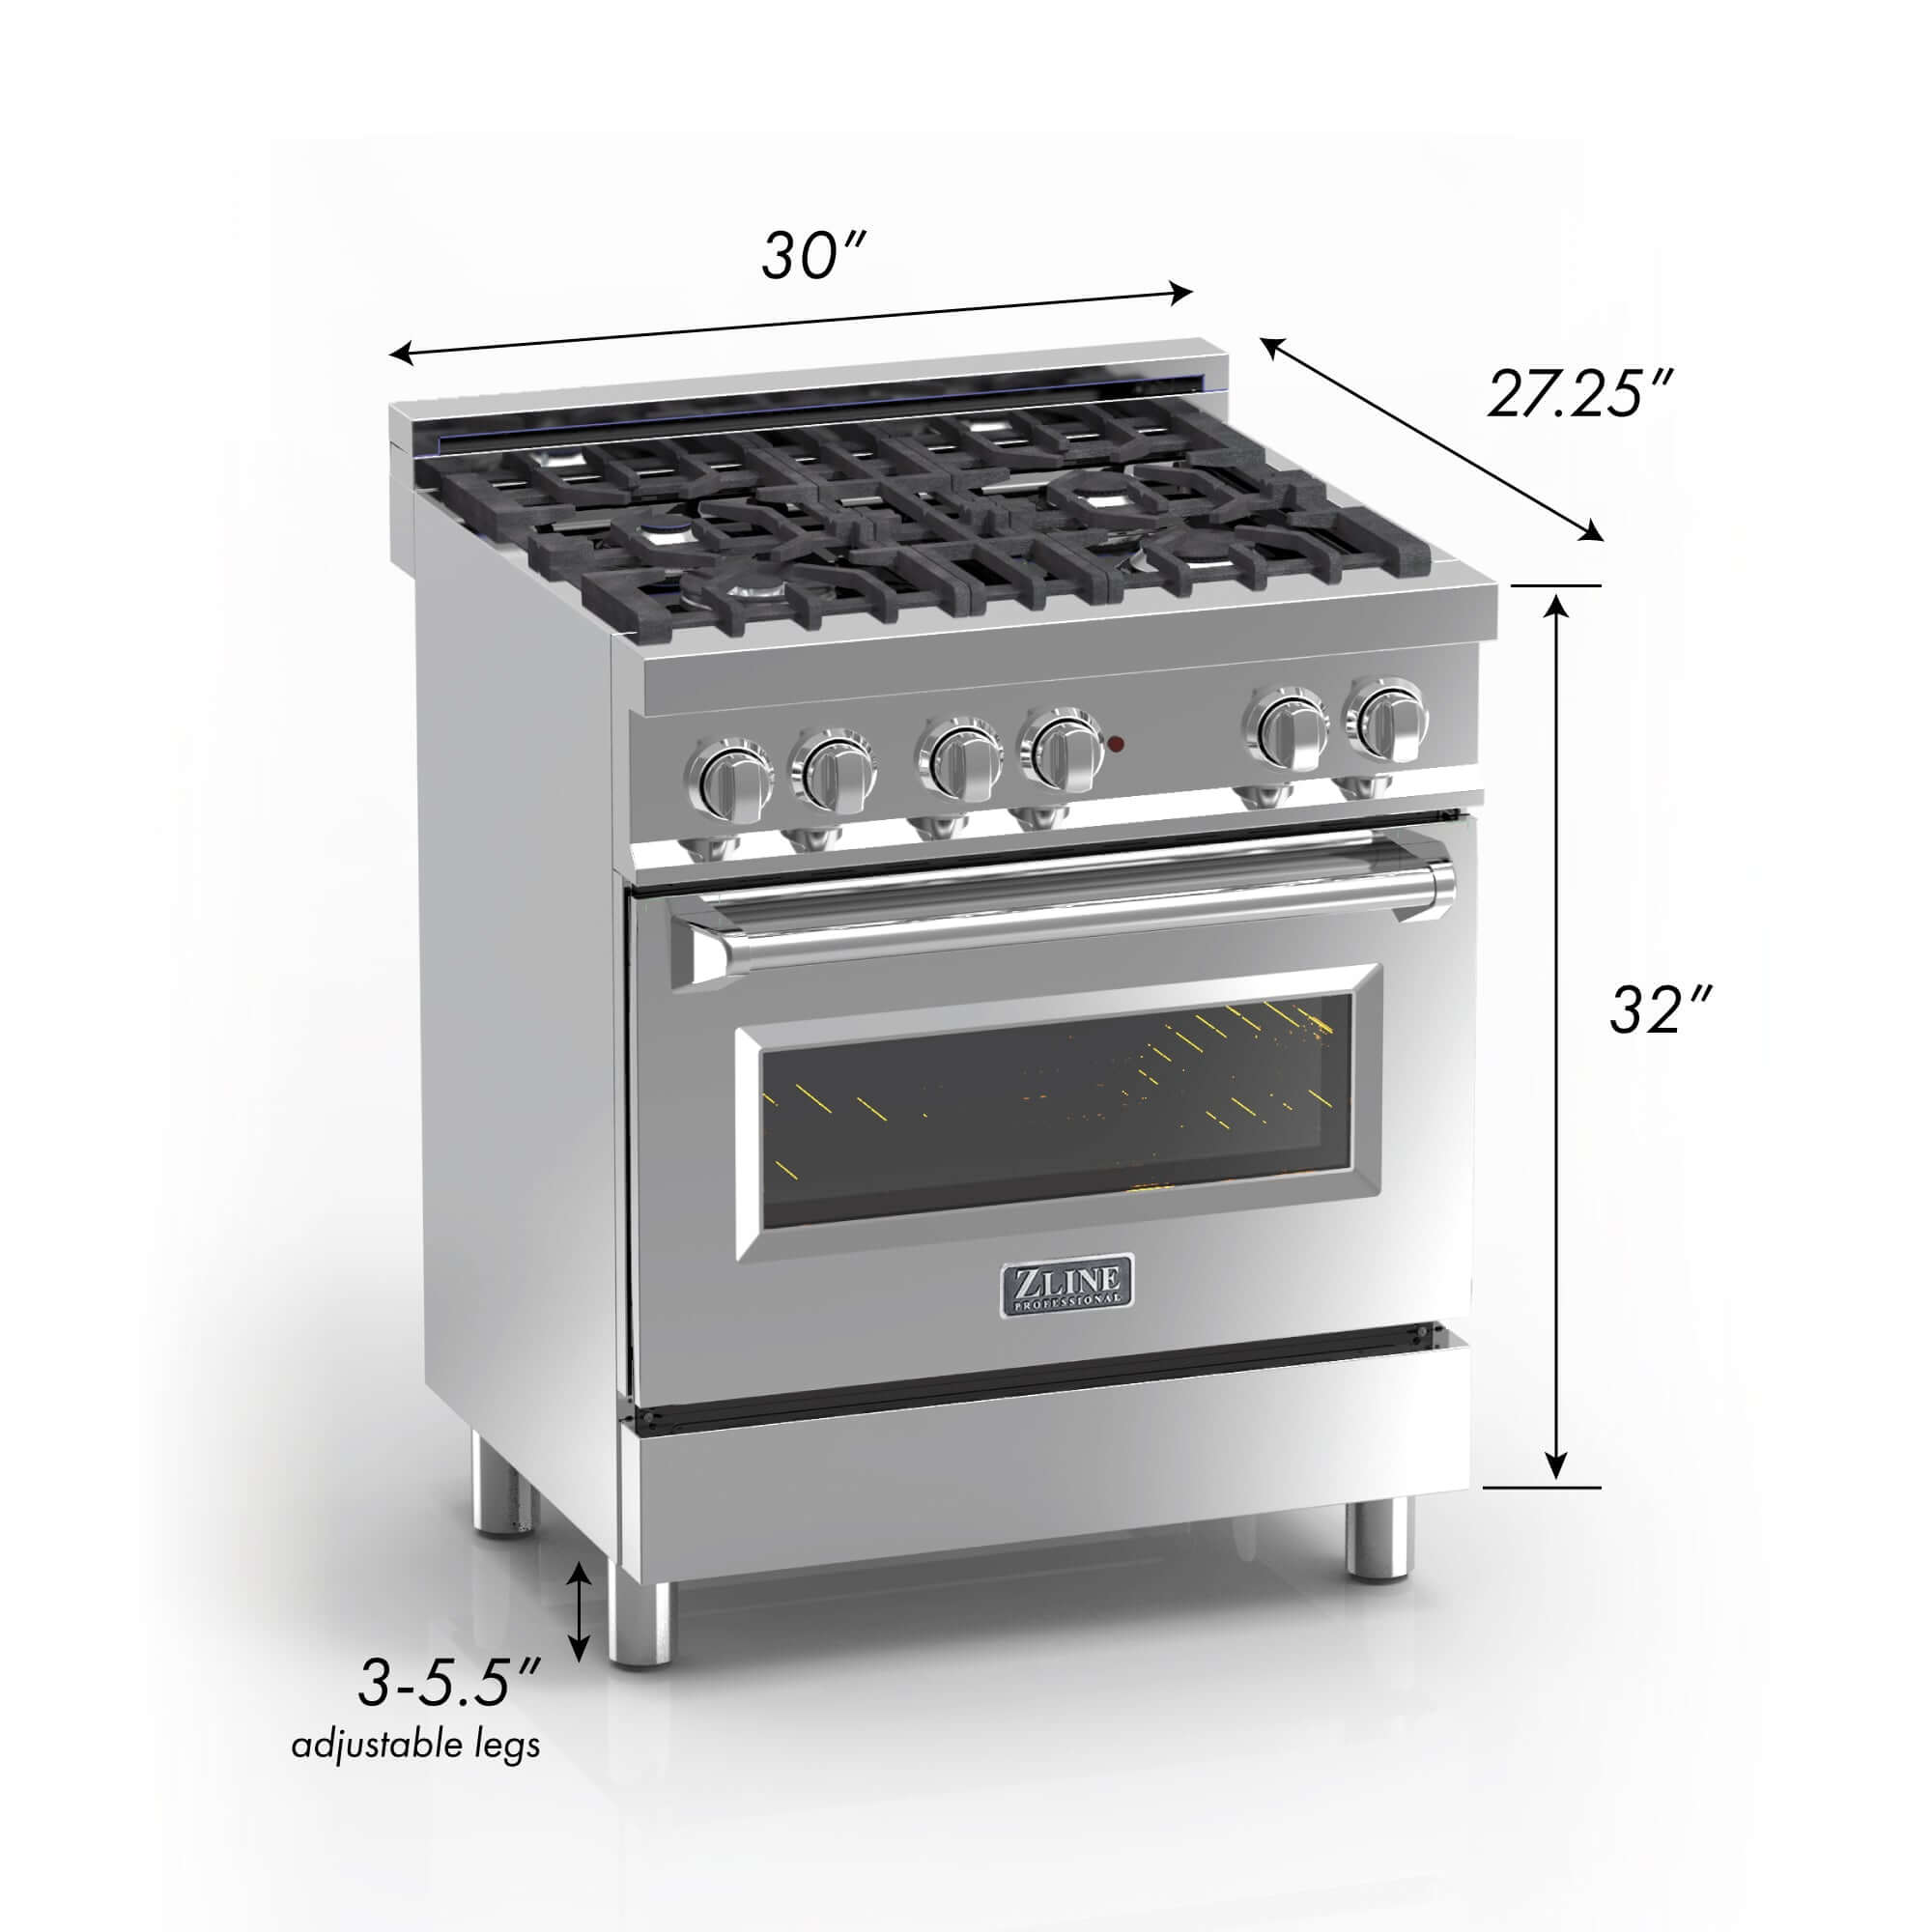 ZLINE 30 in. Kitchen Package with DuraSnow® Stainless Steel Dual Fuel Range with Blue Gloss Door and Convertible Vent Range Hood (2KP-RASBGRH30) dimensional diagram with measurements.